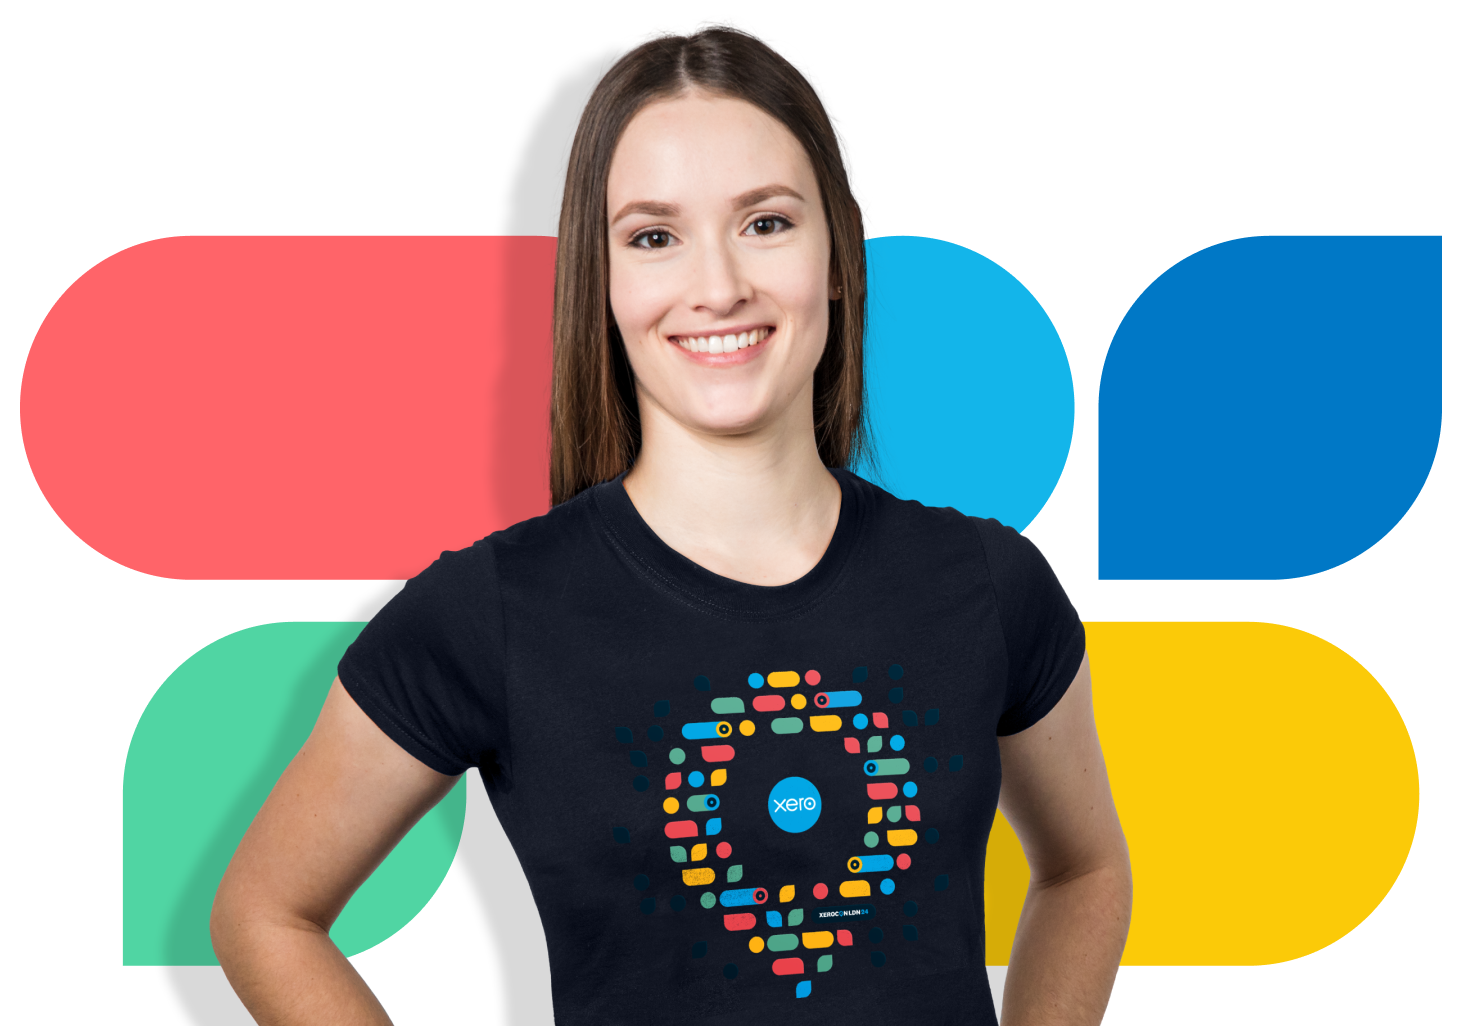 The Xerocon t-shirt in black with a multi-coloured teardrop pattern and the Xero logo on the front